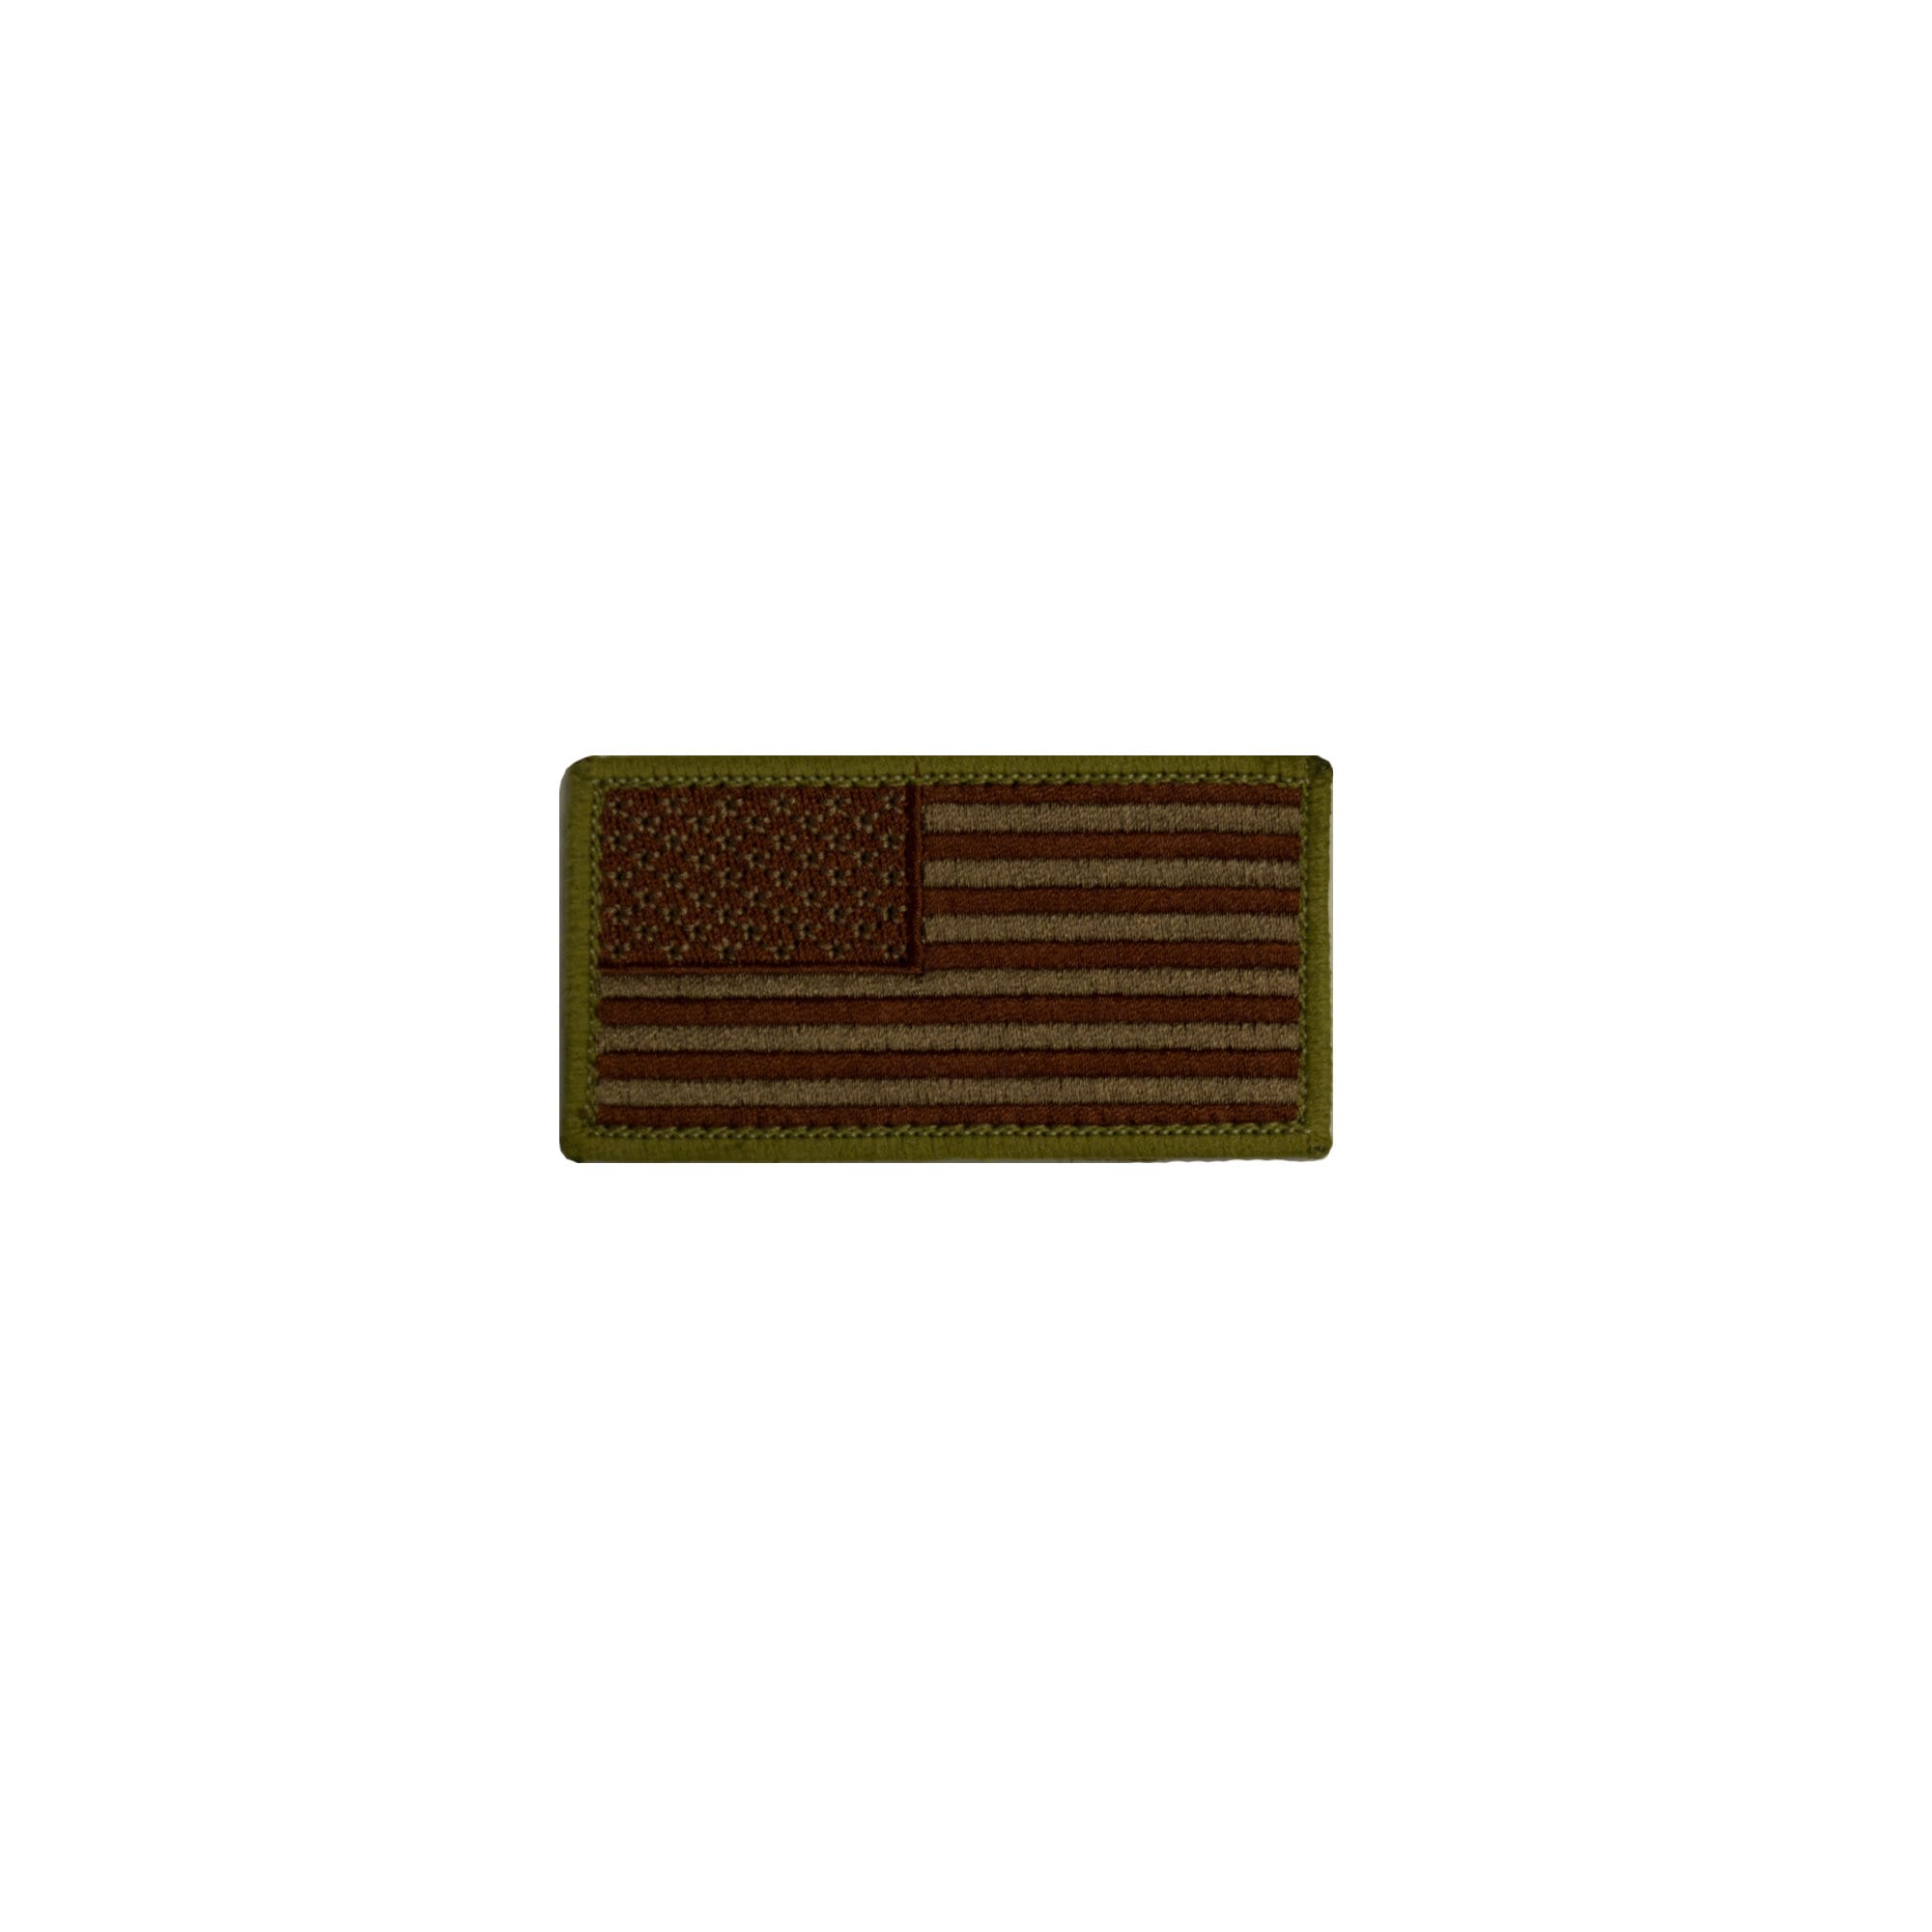 Multicam USA Camo Flag with Spice Stitching - 2x3 Patch, Left Face (Forward)